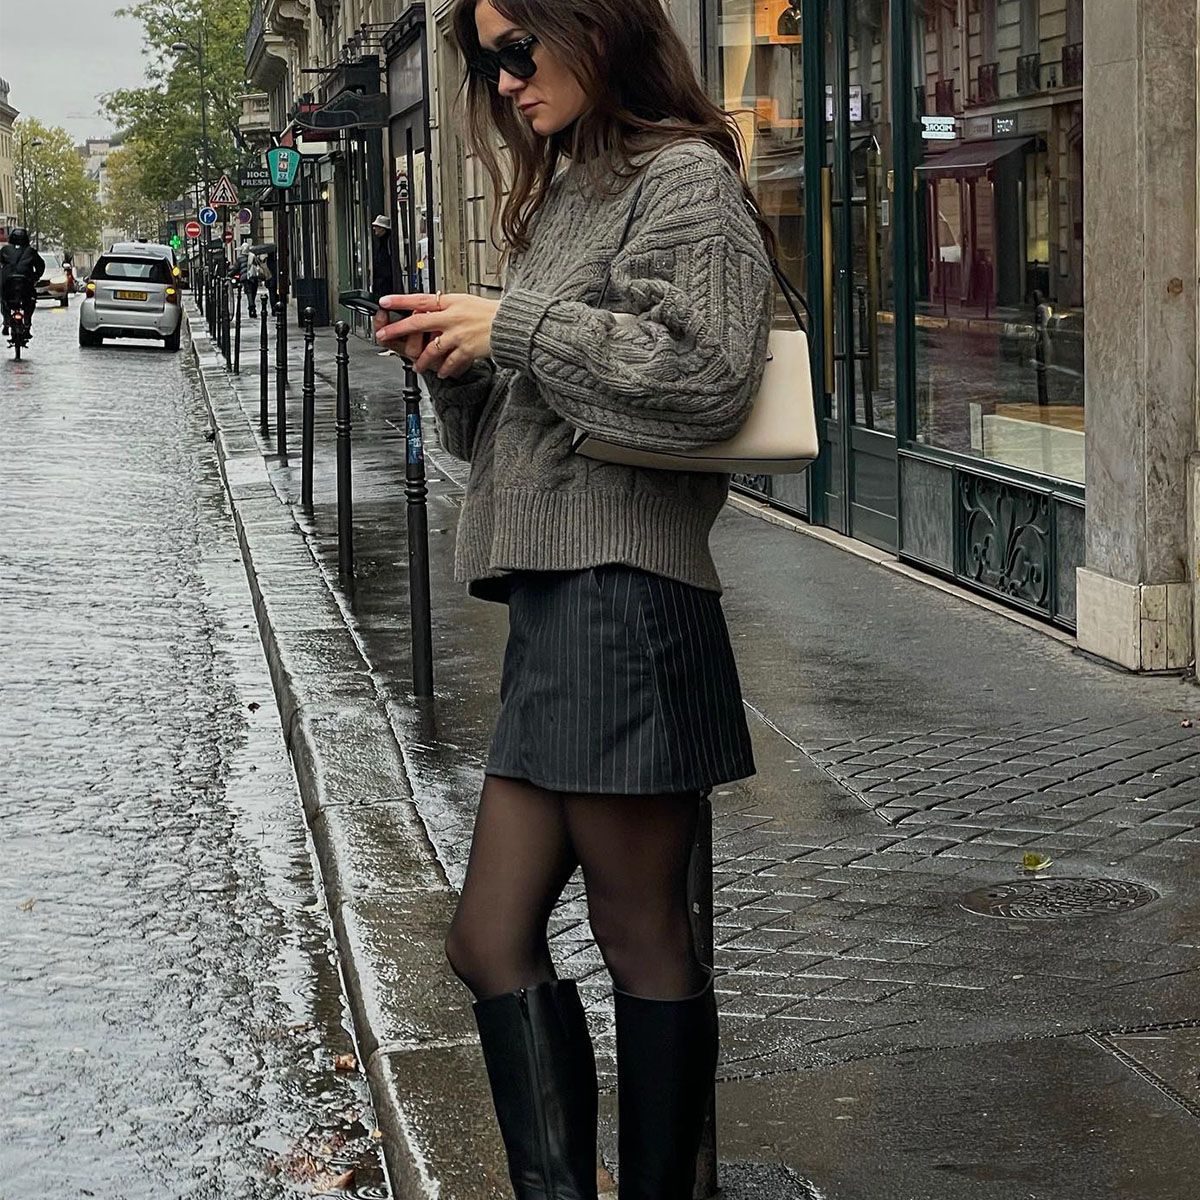 https://cdn.mos.cms.futurecdn.net/whowhatwear/posts/304697/french-girl-skirt-tights-boots-outfit-304697-1672942396583-square-1200-80.jpg